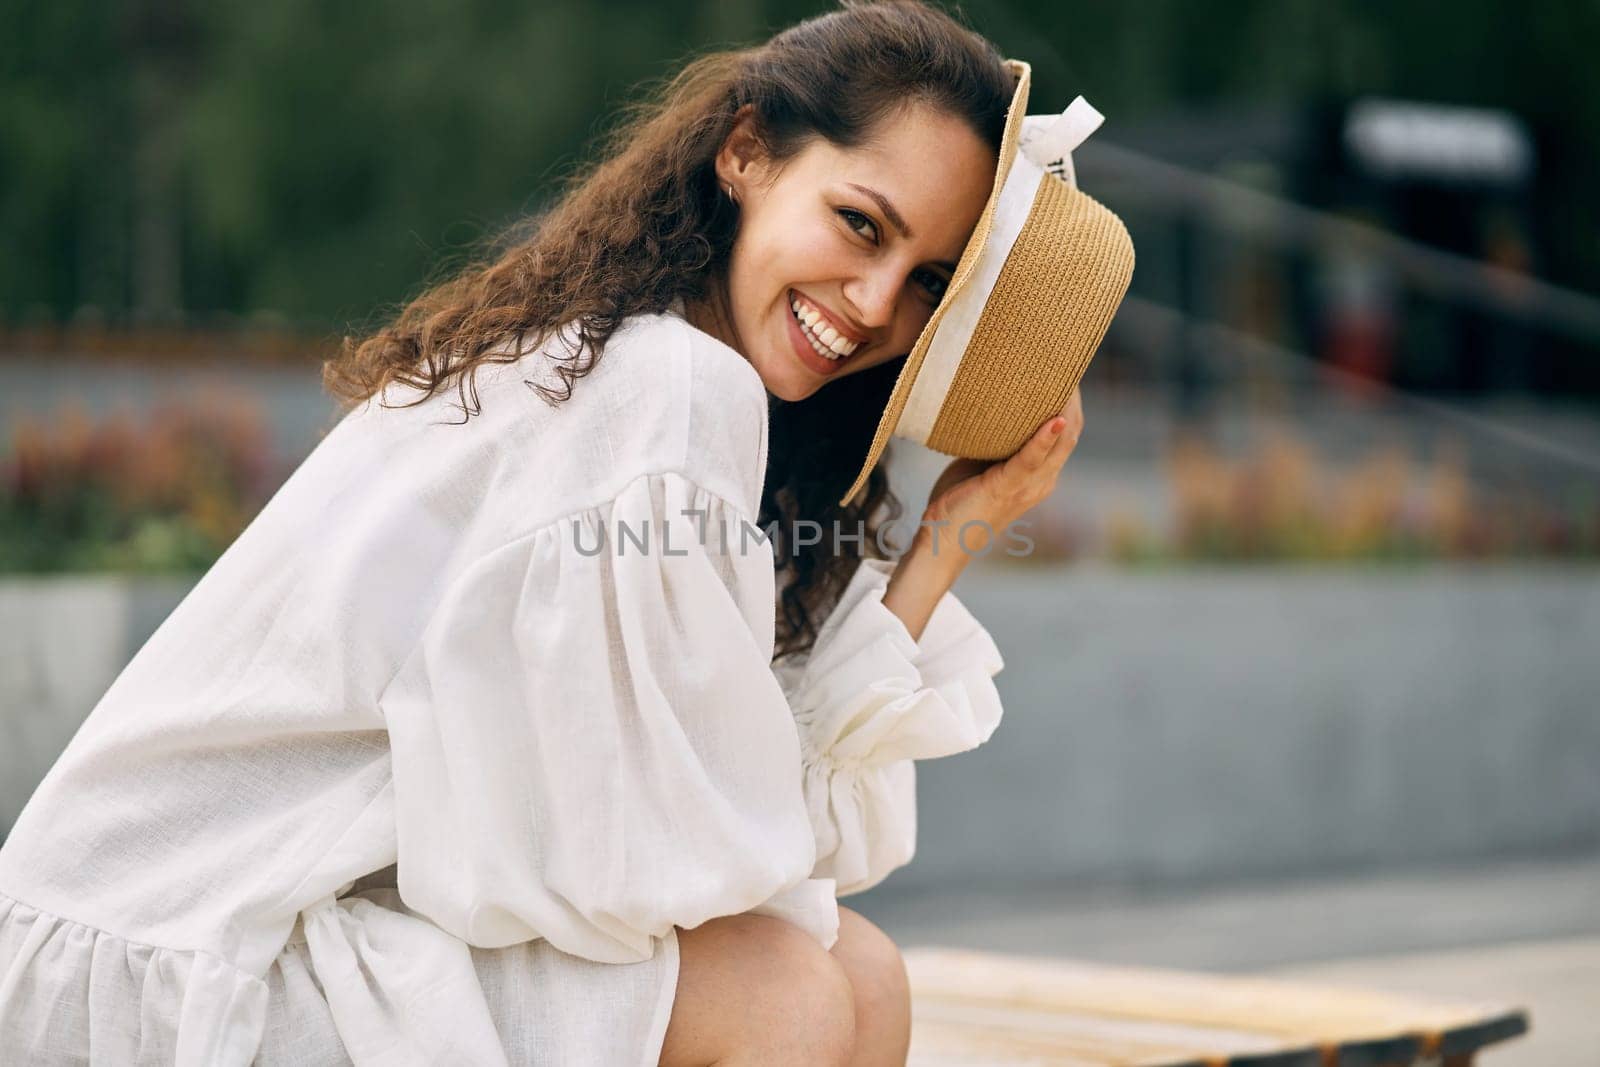 Smiling curly brunette girl in a white dress sitting and covering her face with a hat by driver-s